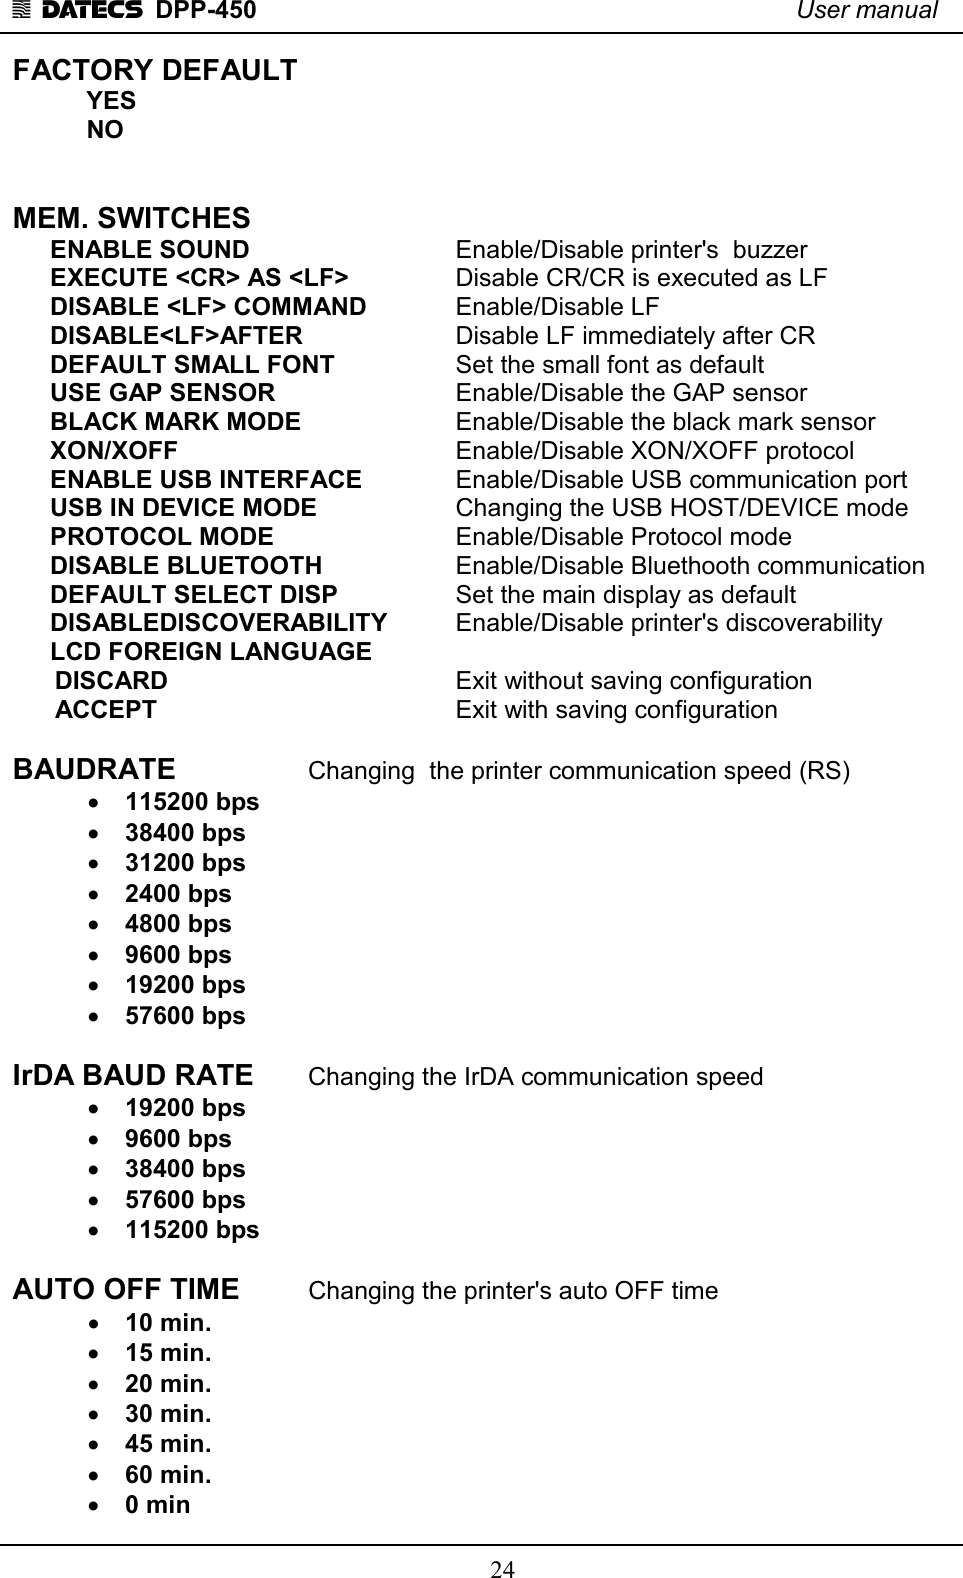 1 DATECS  DPP-450    User manual     24 FACTORY DEFAULT   YES   NO   MEM. SWITCHES ENABLE SOUND       Enable/Disable printer&apos;s  buzzer EXECUTE &lt;CR&gt; AS &lt;LF&gt;      Disable CR/CR is executed as LF DISABLE &lt;LF&gt; COMMAND     Enable/Disable LF DISABLE&lt;LF&gt;AFTER     Disable LF immediately after CR DEFAULT SMALL FONT     Set the small font as default USE GAP SENSOR       Enable/Disable the GAP sensor BLACK MARK MODE      Enable/Disable the black mark sensor XON/XOFF          Enable/Disable XON/XOFF protocol ENABLE USB INTERFACE     Enable/Disable USB communication port  USB IN DEVICE MODE      Changing the USB HOST/DEVICE mode PROTOCOL MODE        Enable/Disable Protocol mode DISABLE BLUETOOTH      Enable/Disable Bluethooth communication  DEFAULT SELECT DISP     Set the main display as default  DISABLEDISCOVERABILITY    Enable/Disable printer&apos;s discoverability LCD FOREIGN LANGUAGE       DISCARD          Exit without saving configuration       ACCEPT         Exit with saving configuration  BAUDRATE     Changing  the printer communication speed (RS) • 115200 bps                      • 38400 bps       • 31200 bps   • 2400 bps • 4800 bps • 9600 bps • 19200 bps • 57600 bps  IrDA BAUD RATE   Changing the IrDA communication speed • 19200 bps • 9600 bps • 38400 bps • 57600 bps • 115200 bps  AUTO OFF TIME     Changing the printer&apos;s auto OFF time • 10 min. • 15 min. • 20 min. • 30 min. • 45 min. • 60 min. • 0 min 